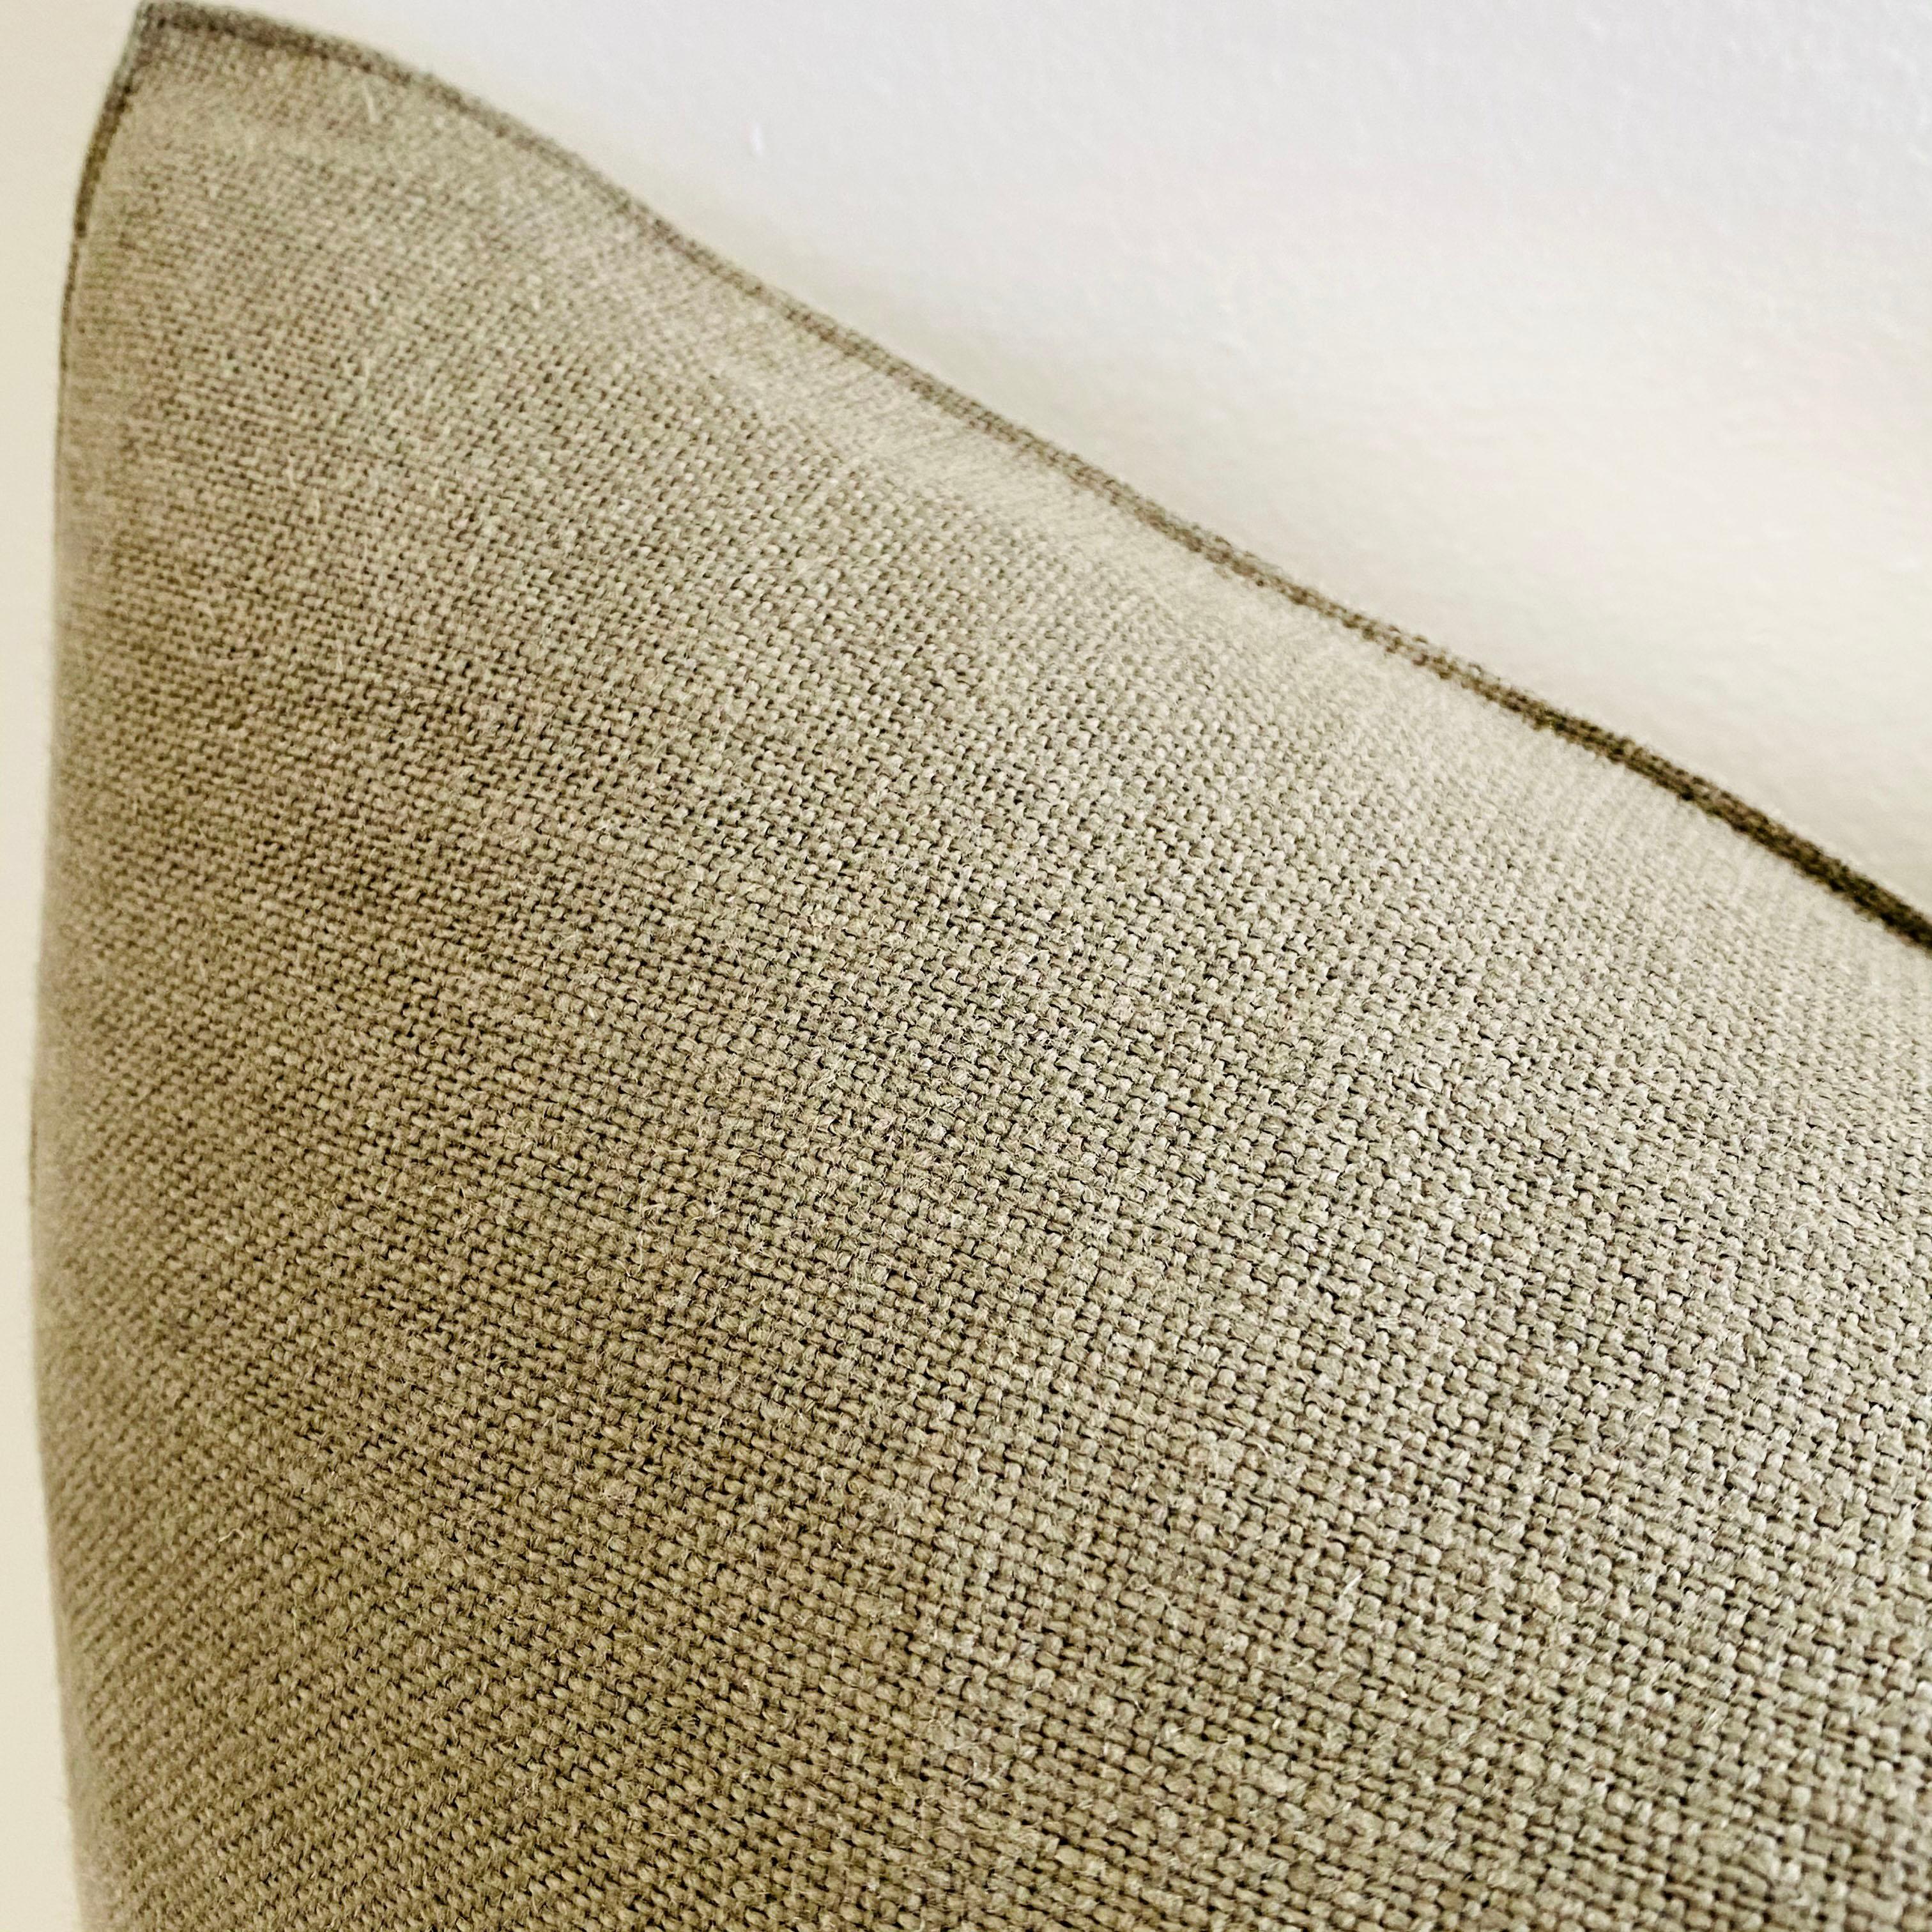 New Belgian linen accent pillow in Kaki color.
100% pure natural linen accent pillow cover. Envelope style closure.
Size 20 x 20
Down insert is not included.